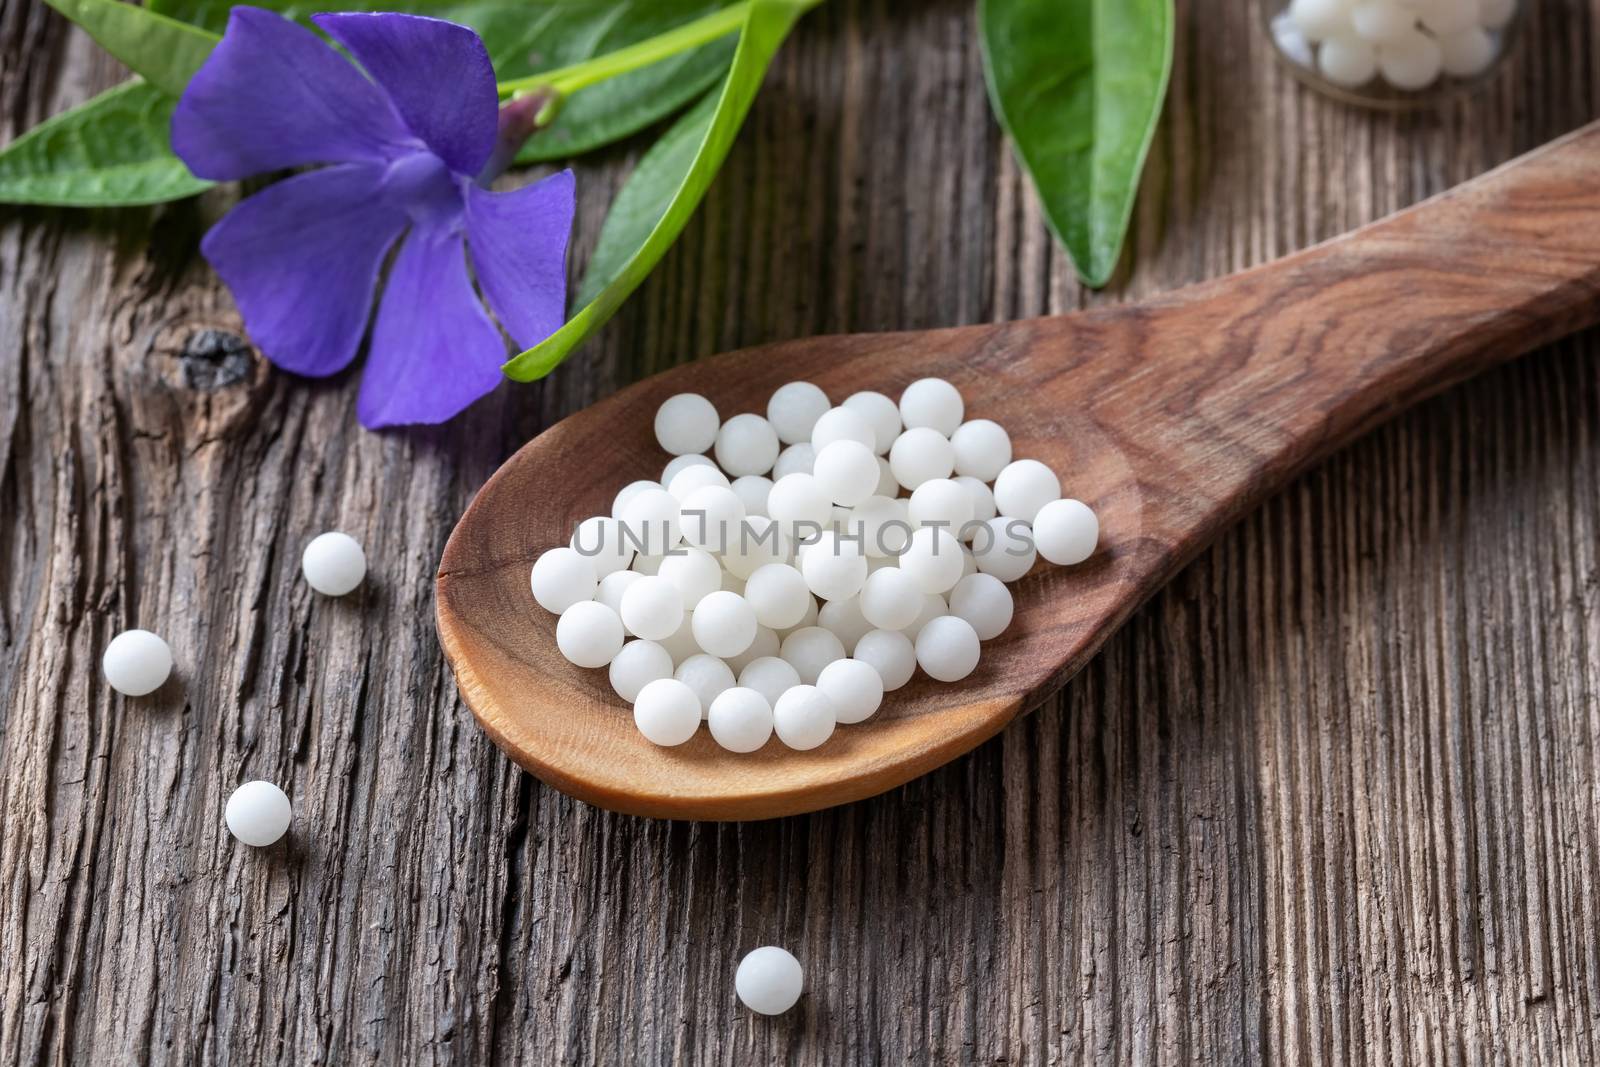 Vinca minor homeopathic remedy on a spoon, with fresh lesser periwinkle plant in the background